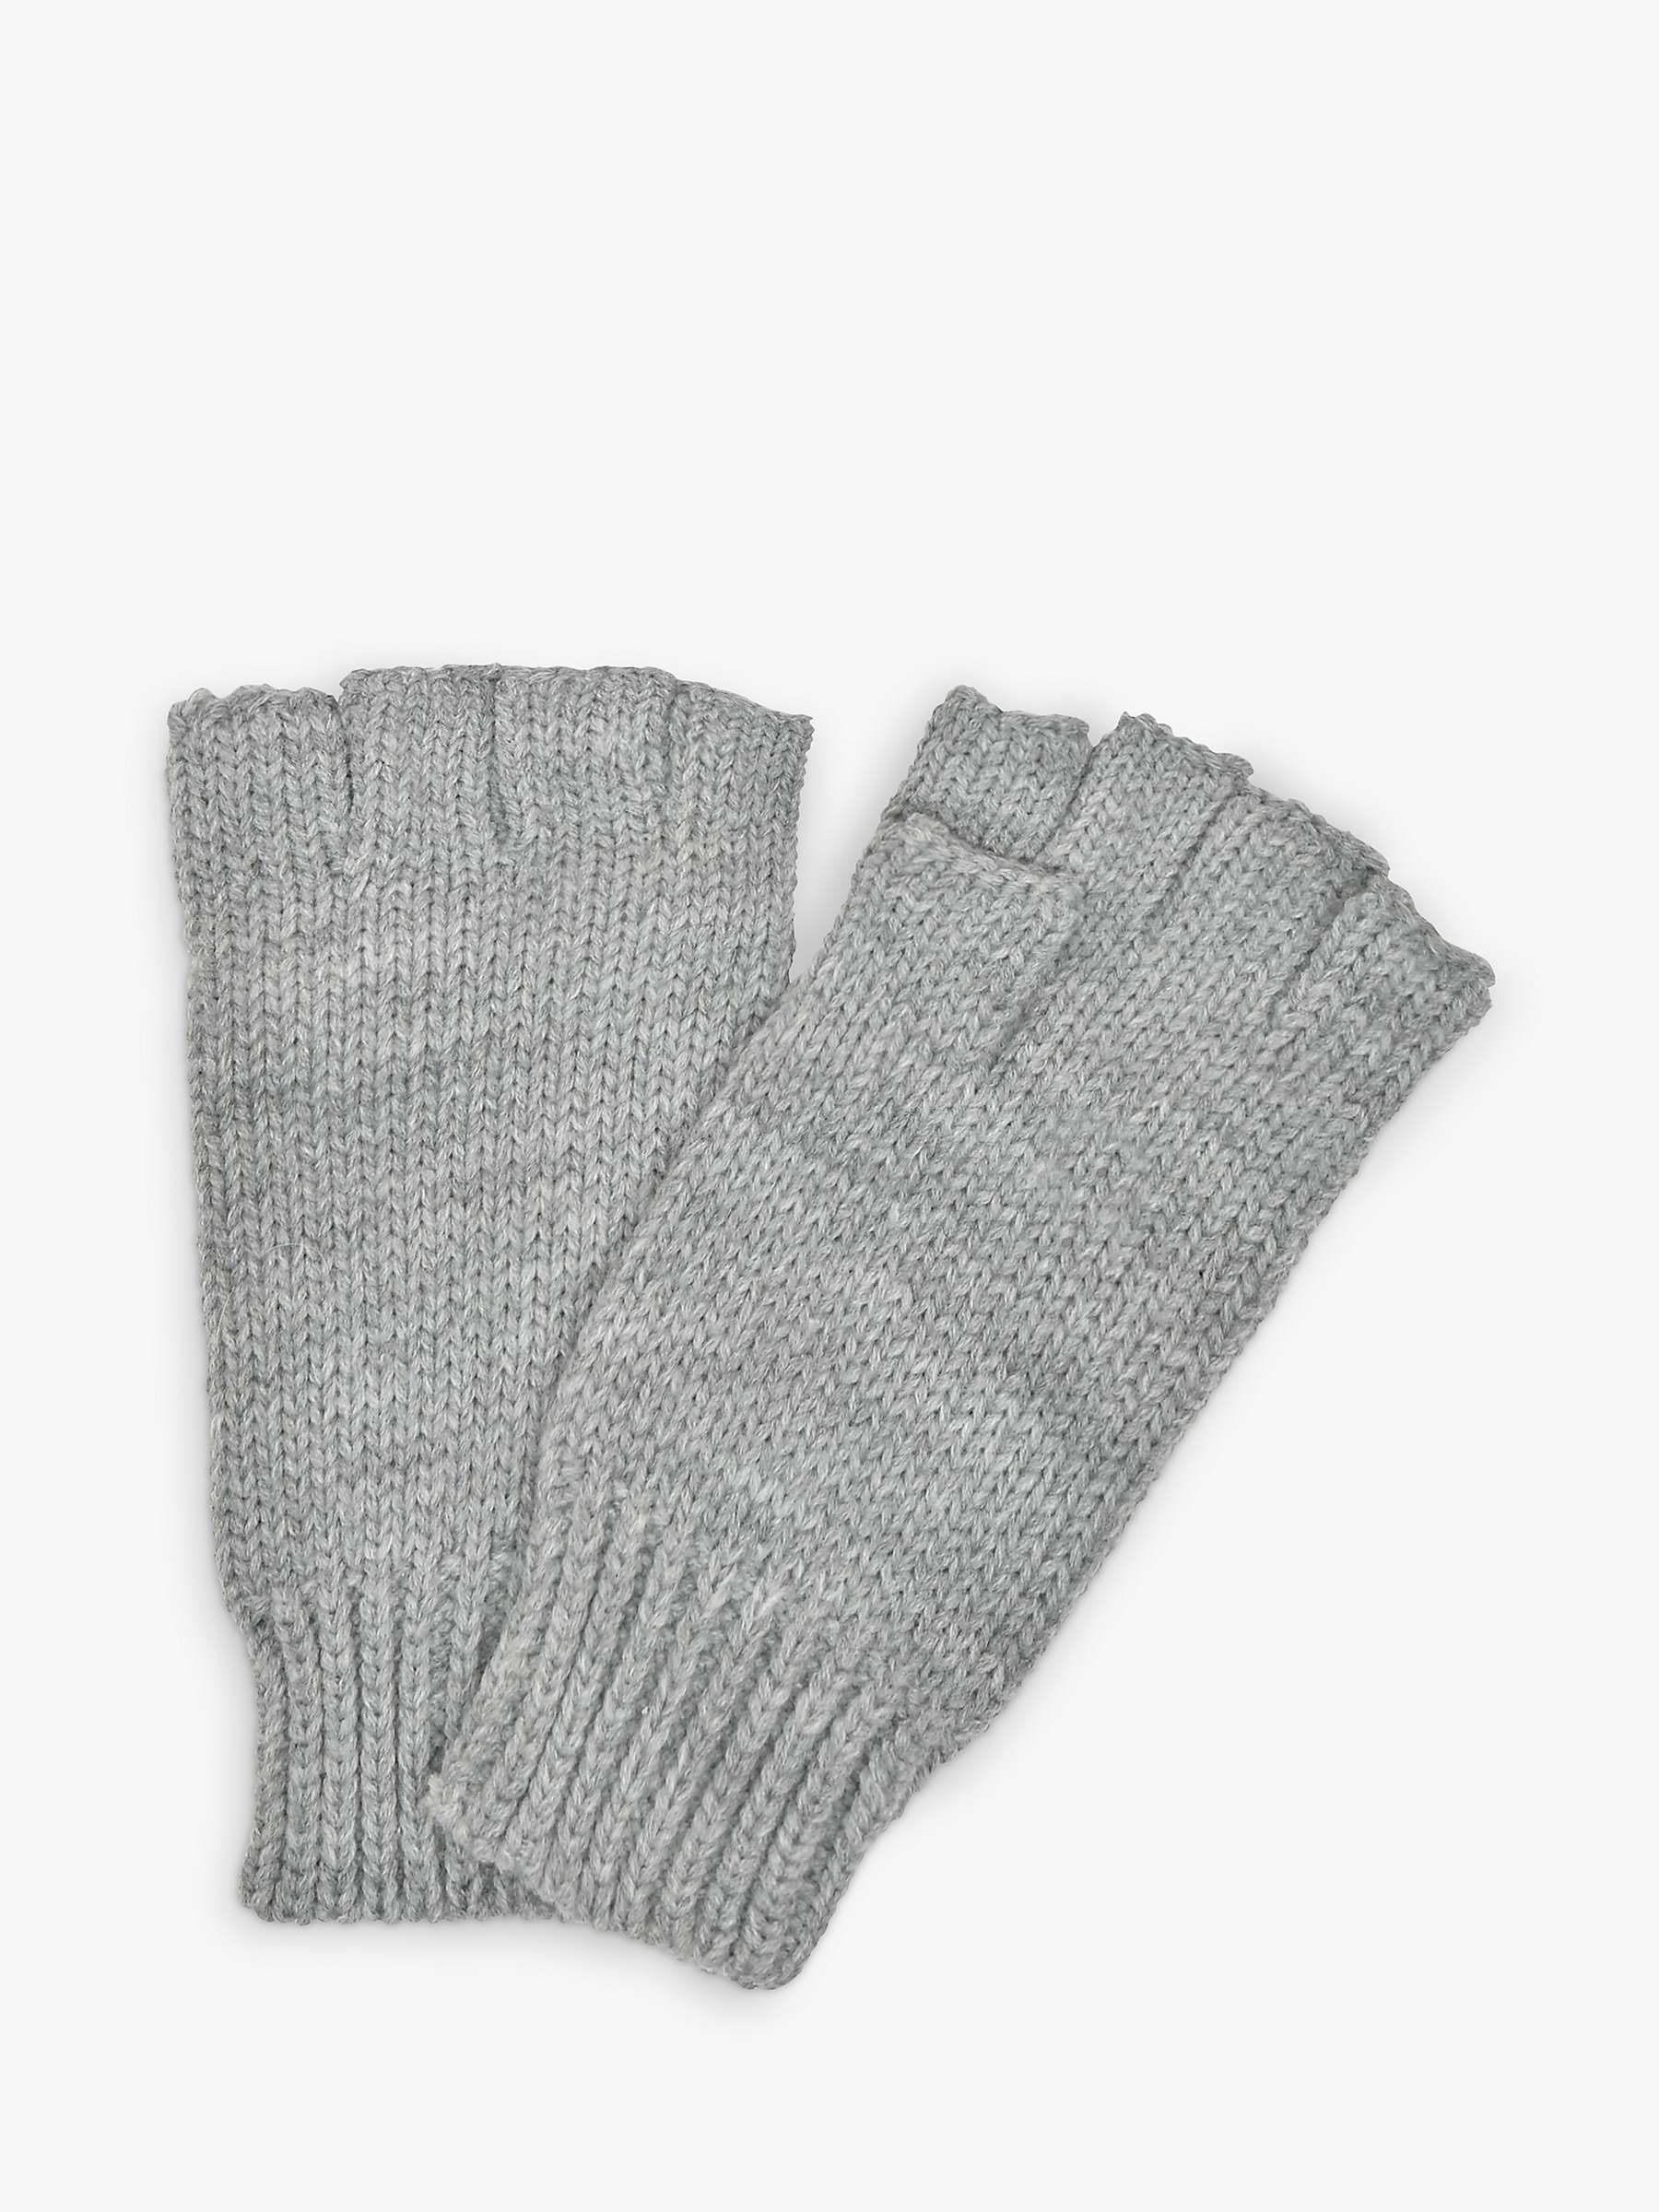 Buy French Connection Fingerless Gloves, Light Grey Online at johnlewis.com